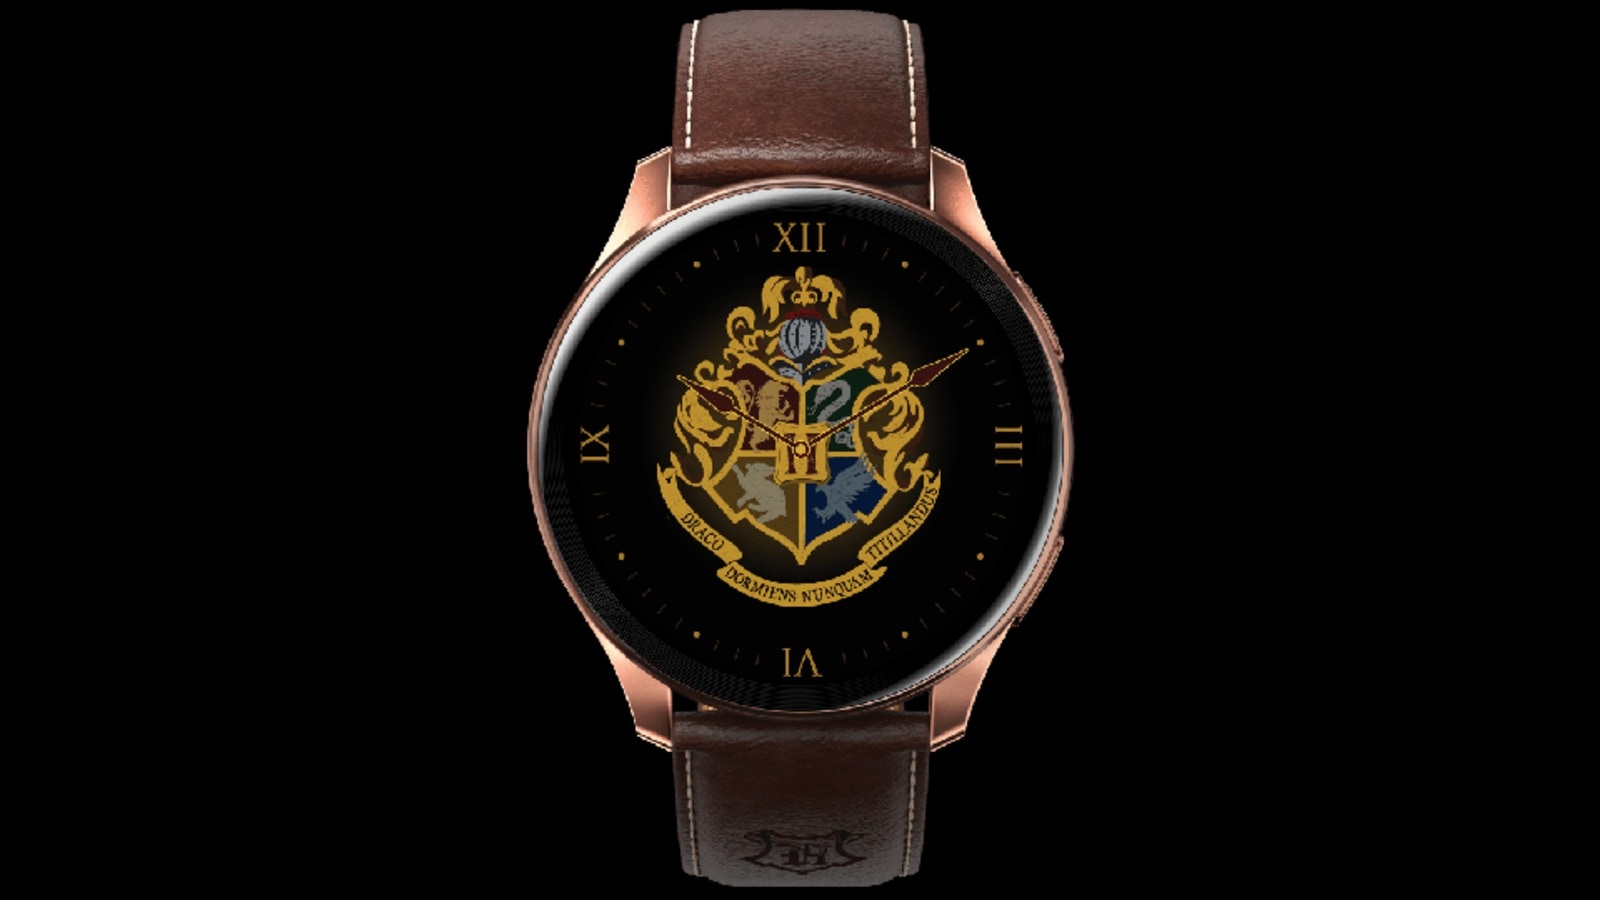 OnePlus Watch Harry Potter Limited Edition - The Nostalgic Time Keeper